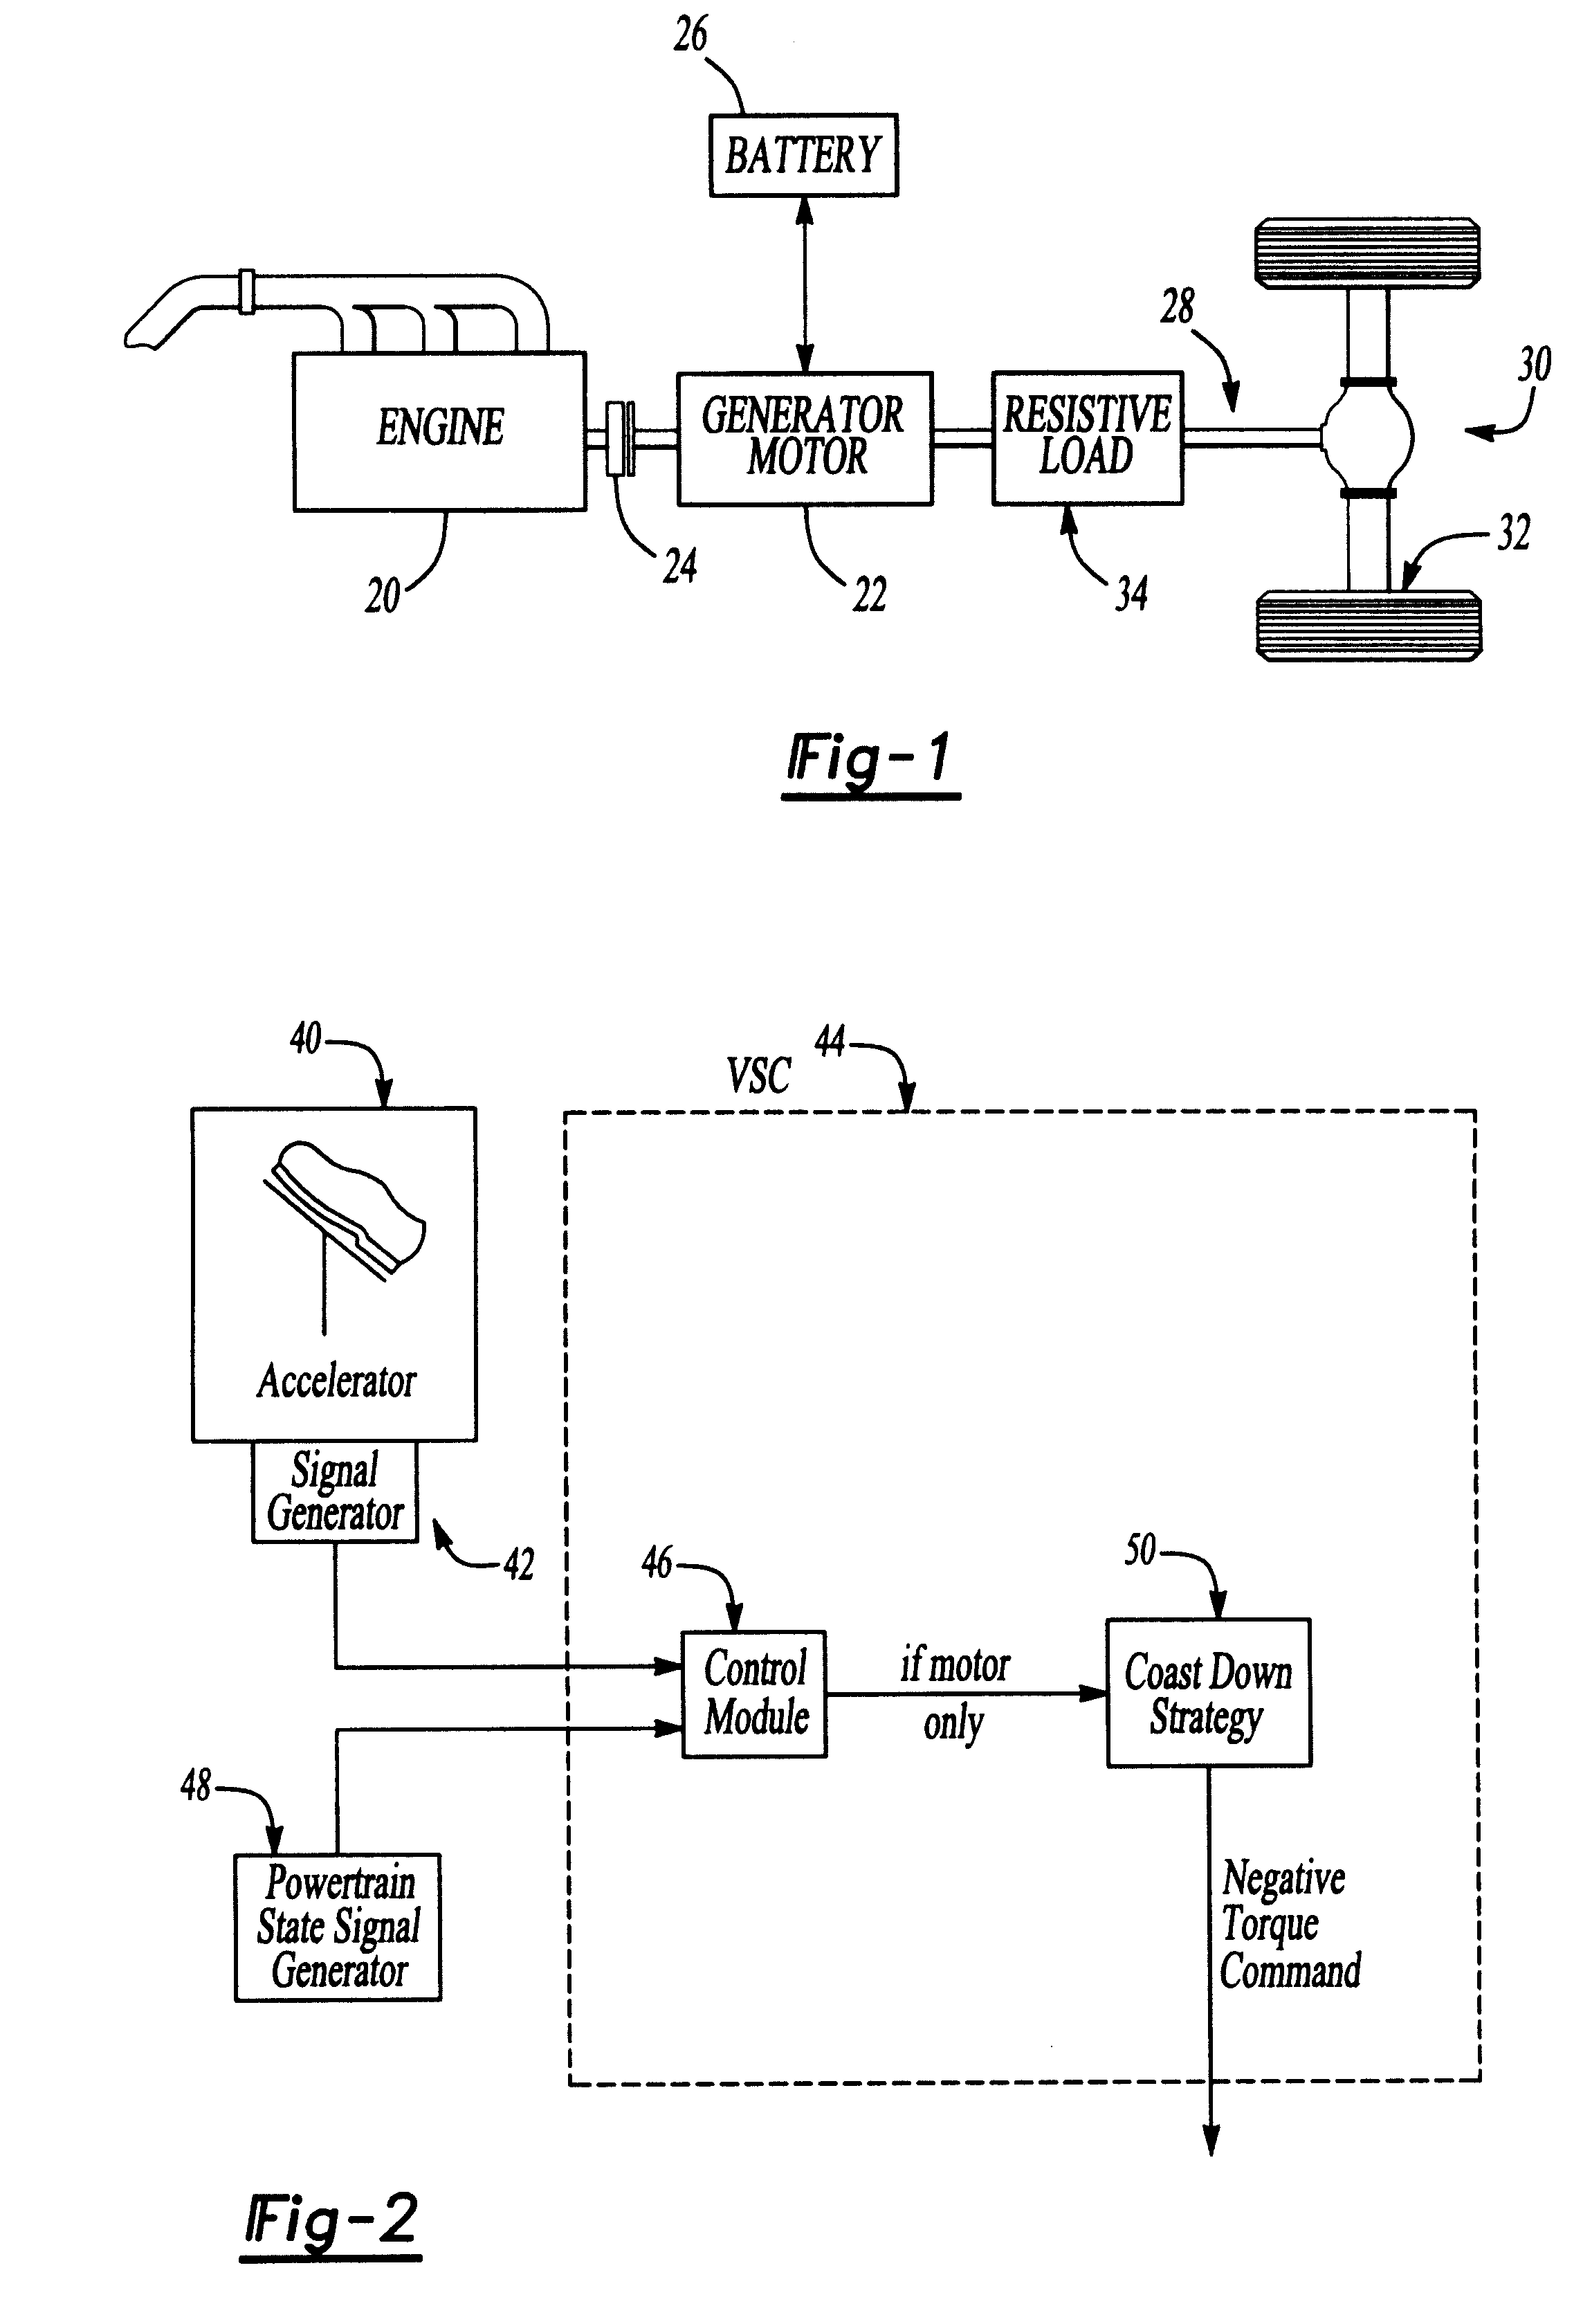 Method and system for providing for vehicle drivability feel after accelerator release in an electric or hybrid electric vehicle